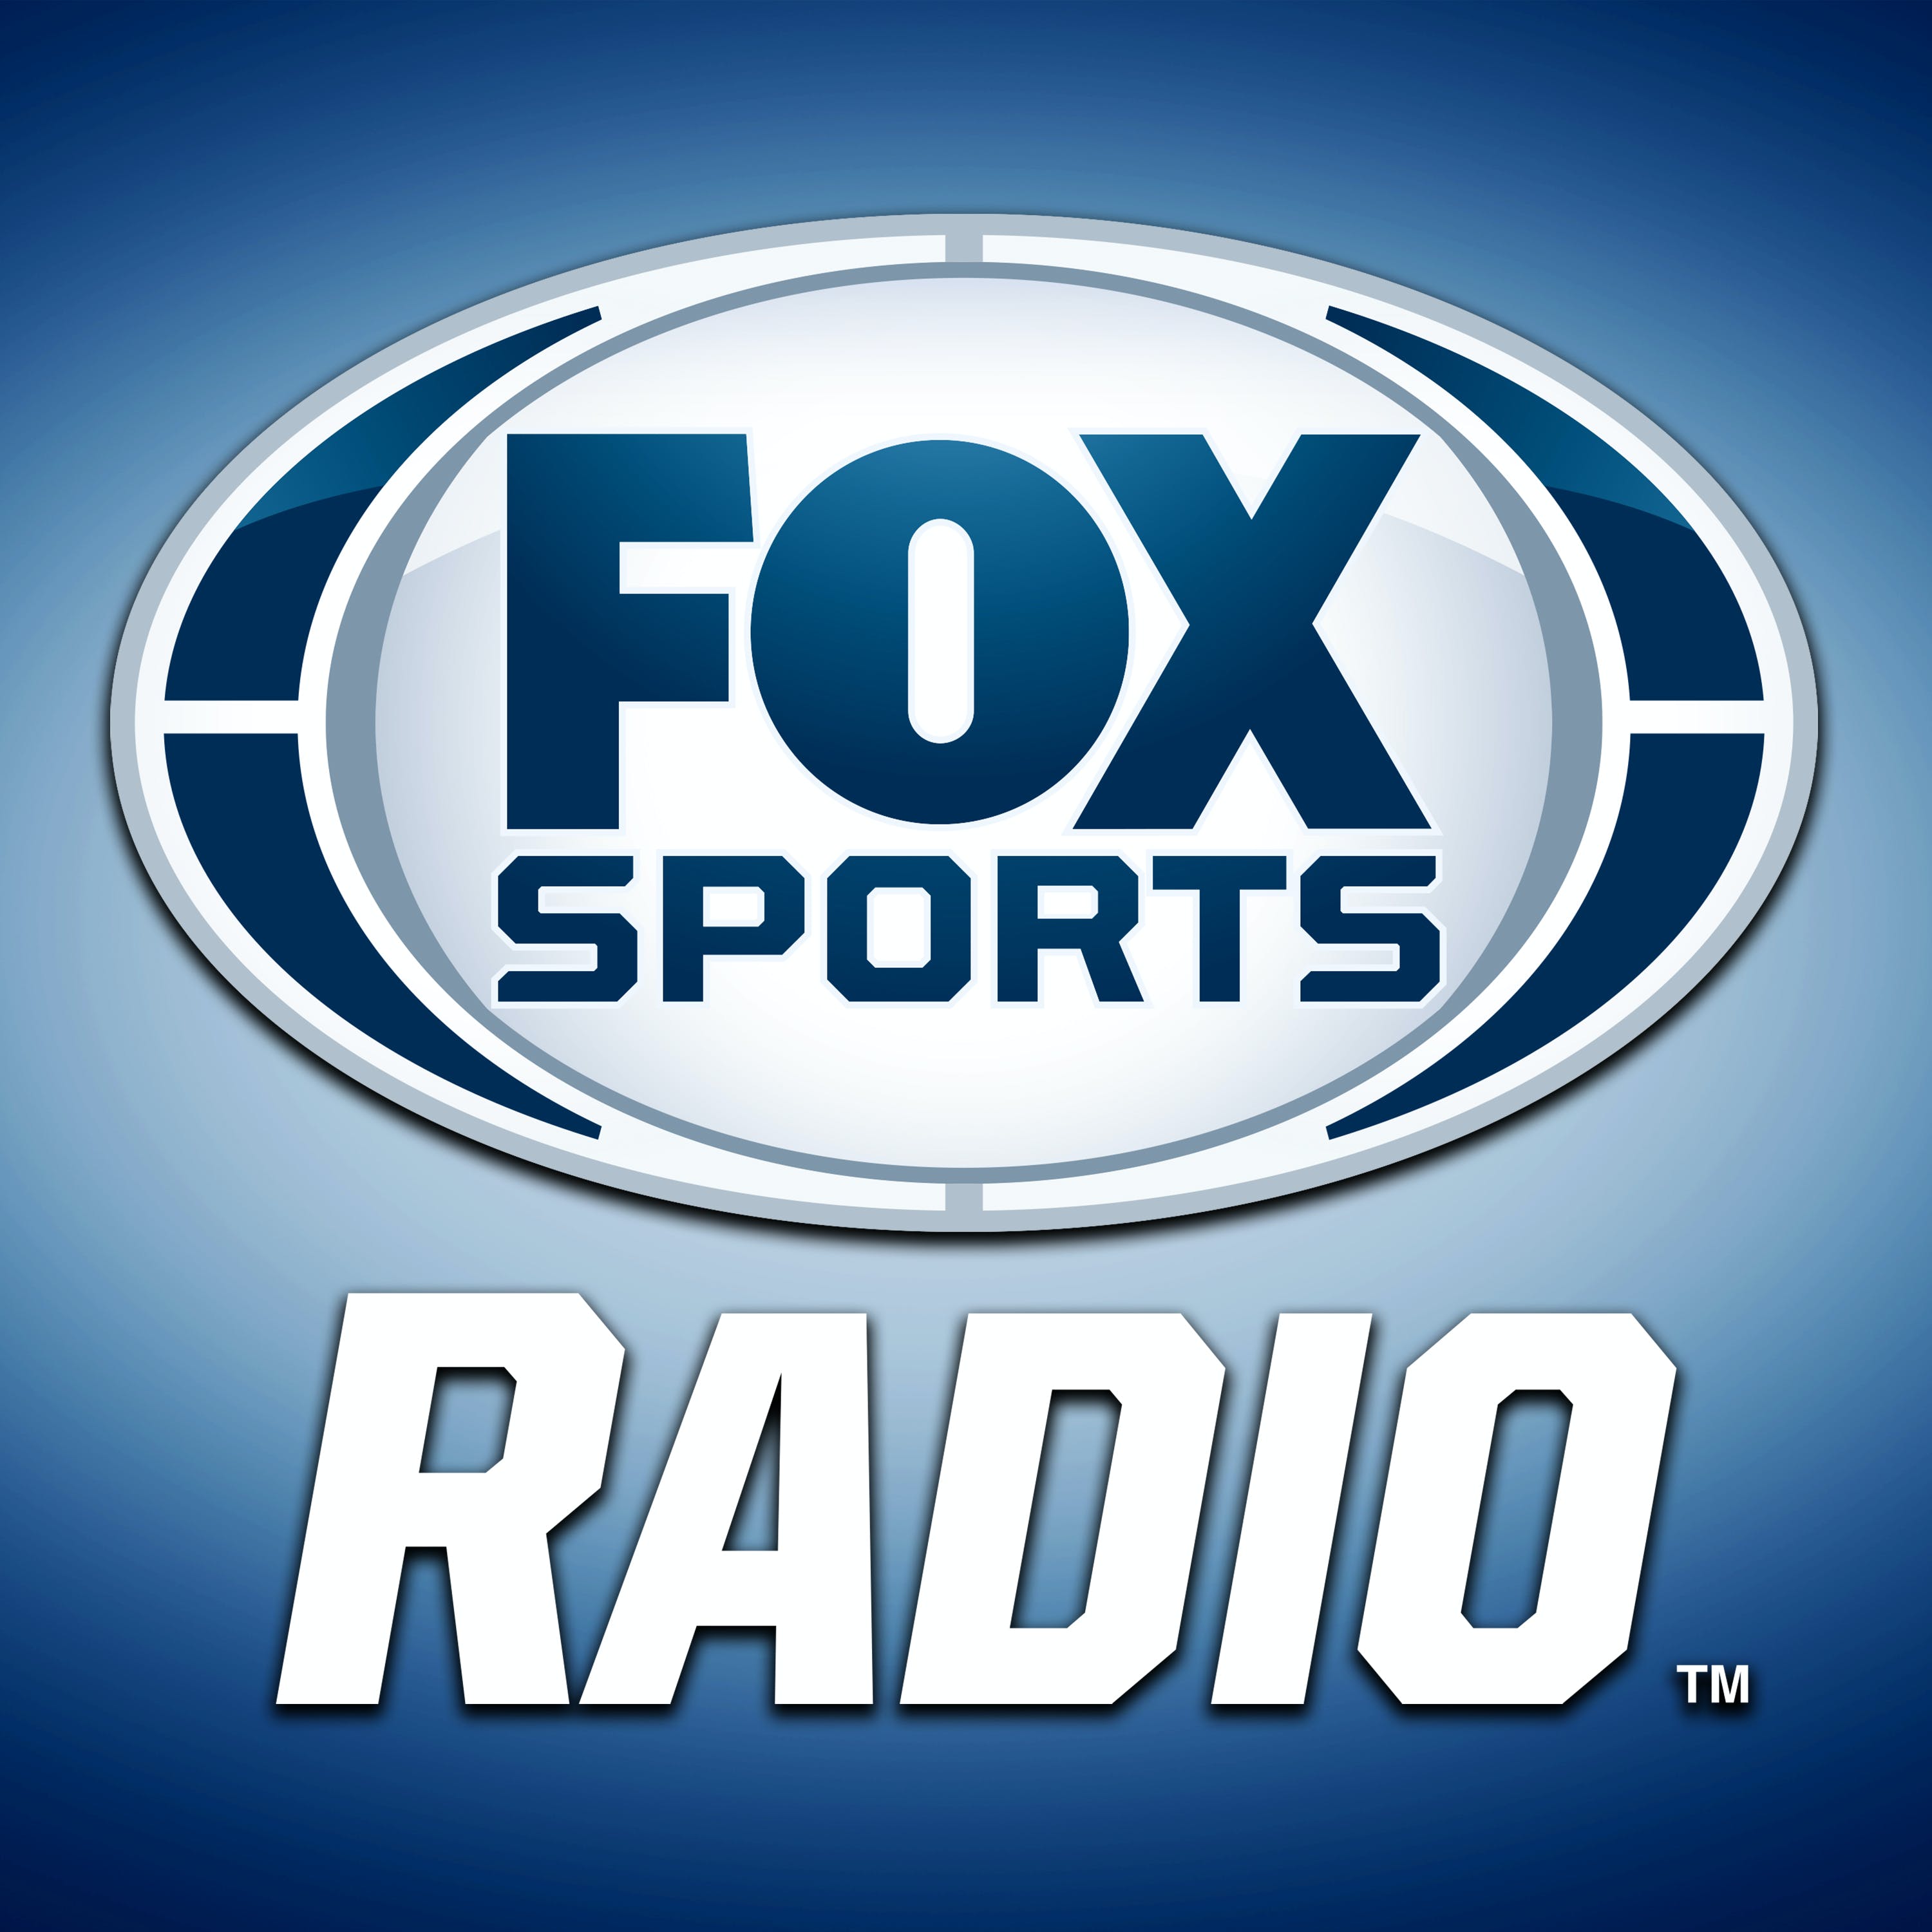 05/30/2021 - FOX Sports Sunday with Steve Hartman and Rich Ohrnberger